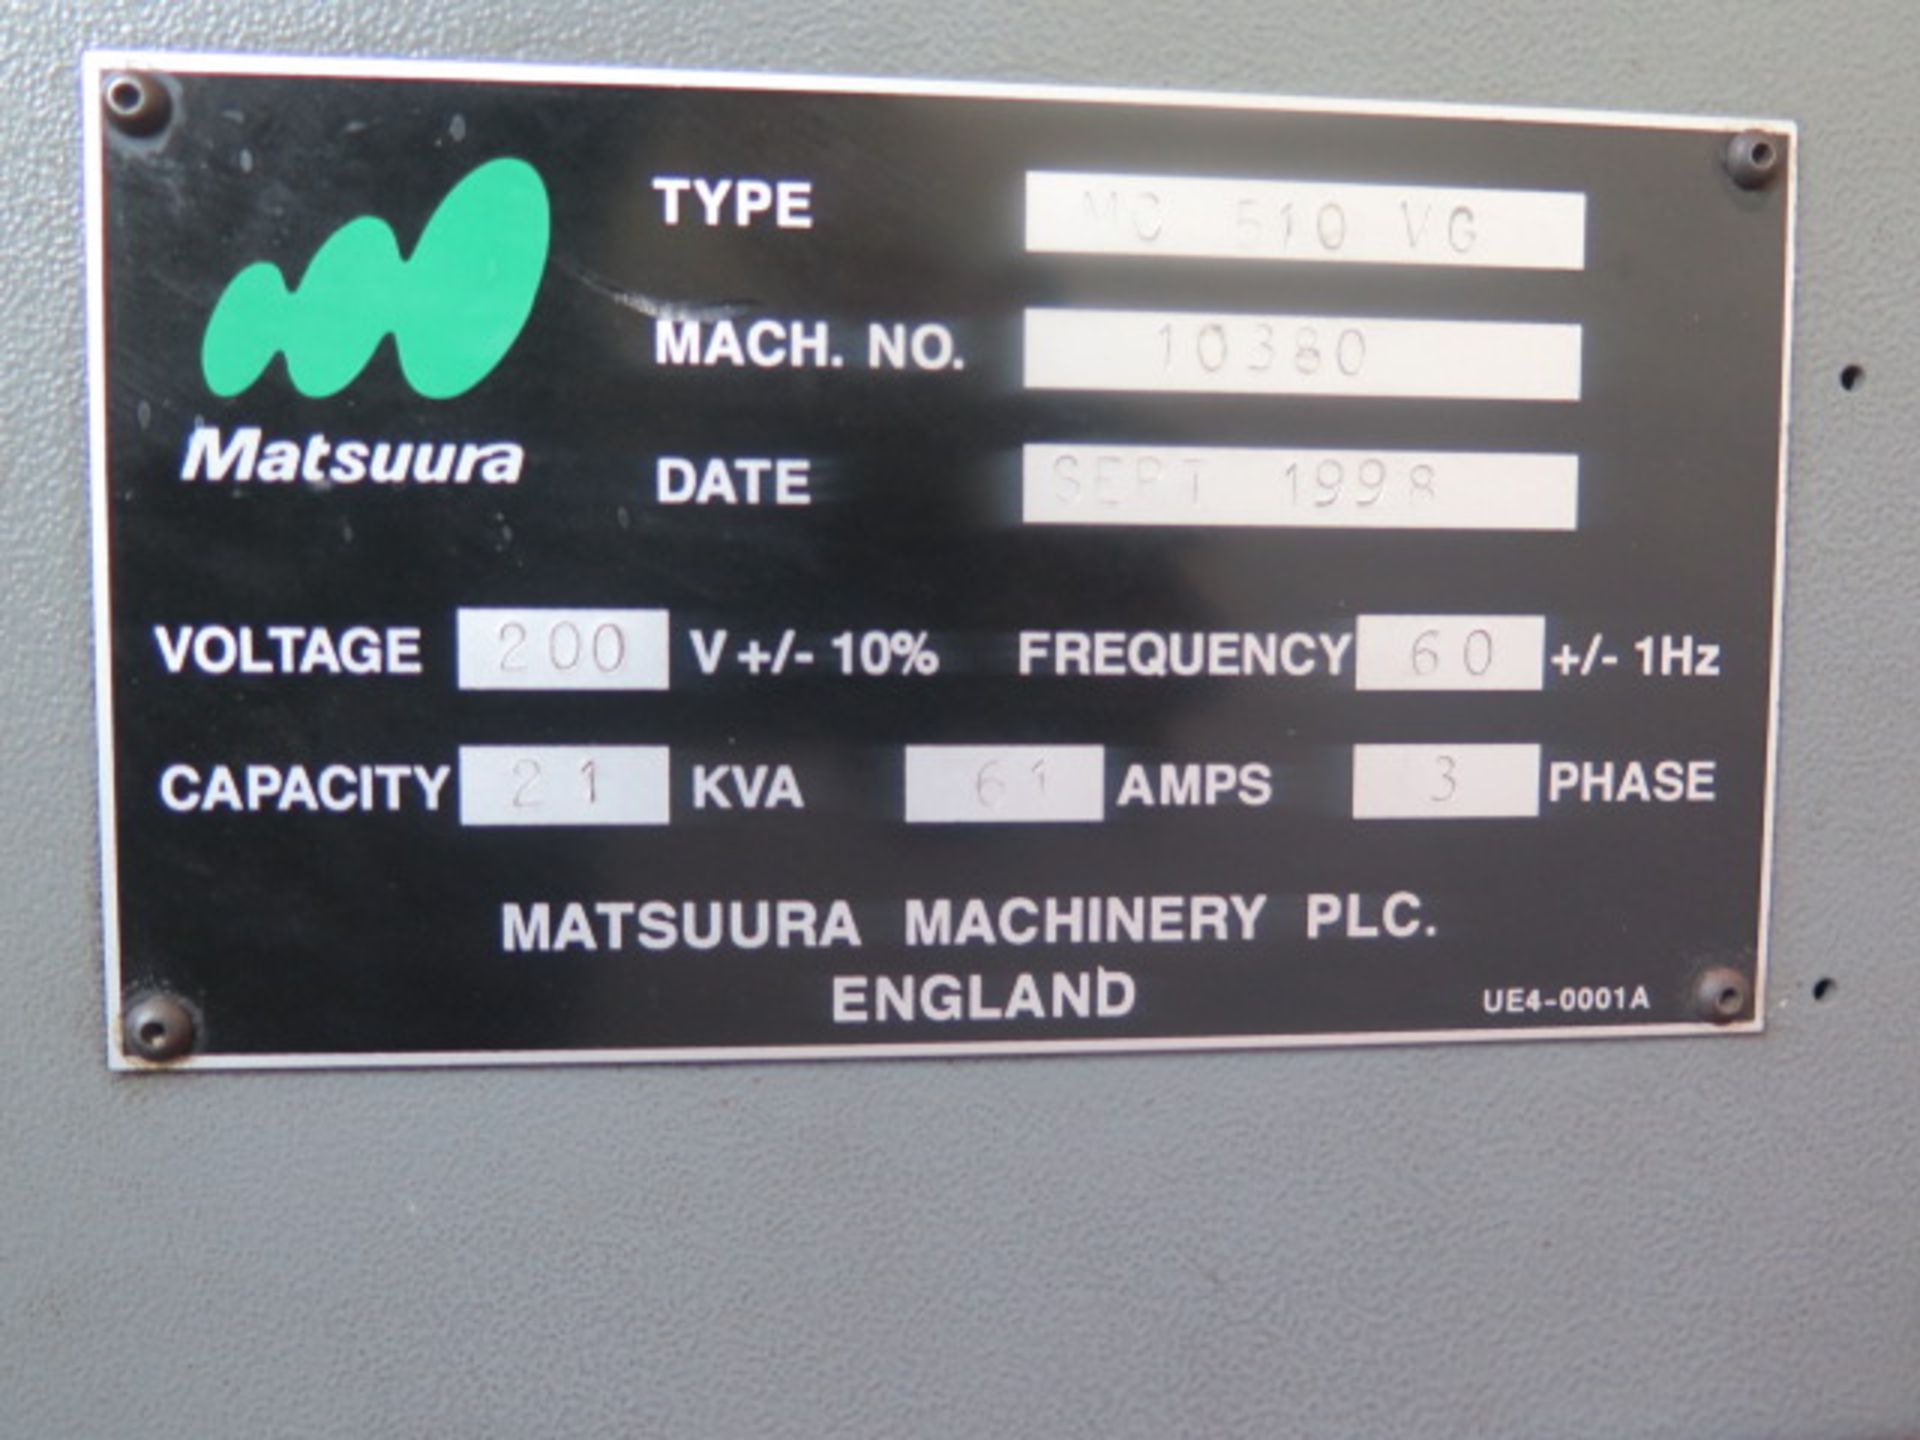 1998 Matsuura MC510VG CNC Vertical Machining Center s/n 10380 (FOR PARTS) w/ Yasnac Controls, 20- - Image 9 of 9